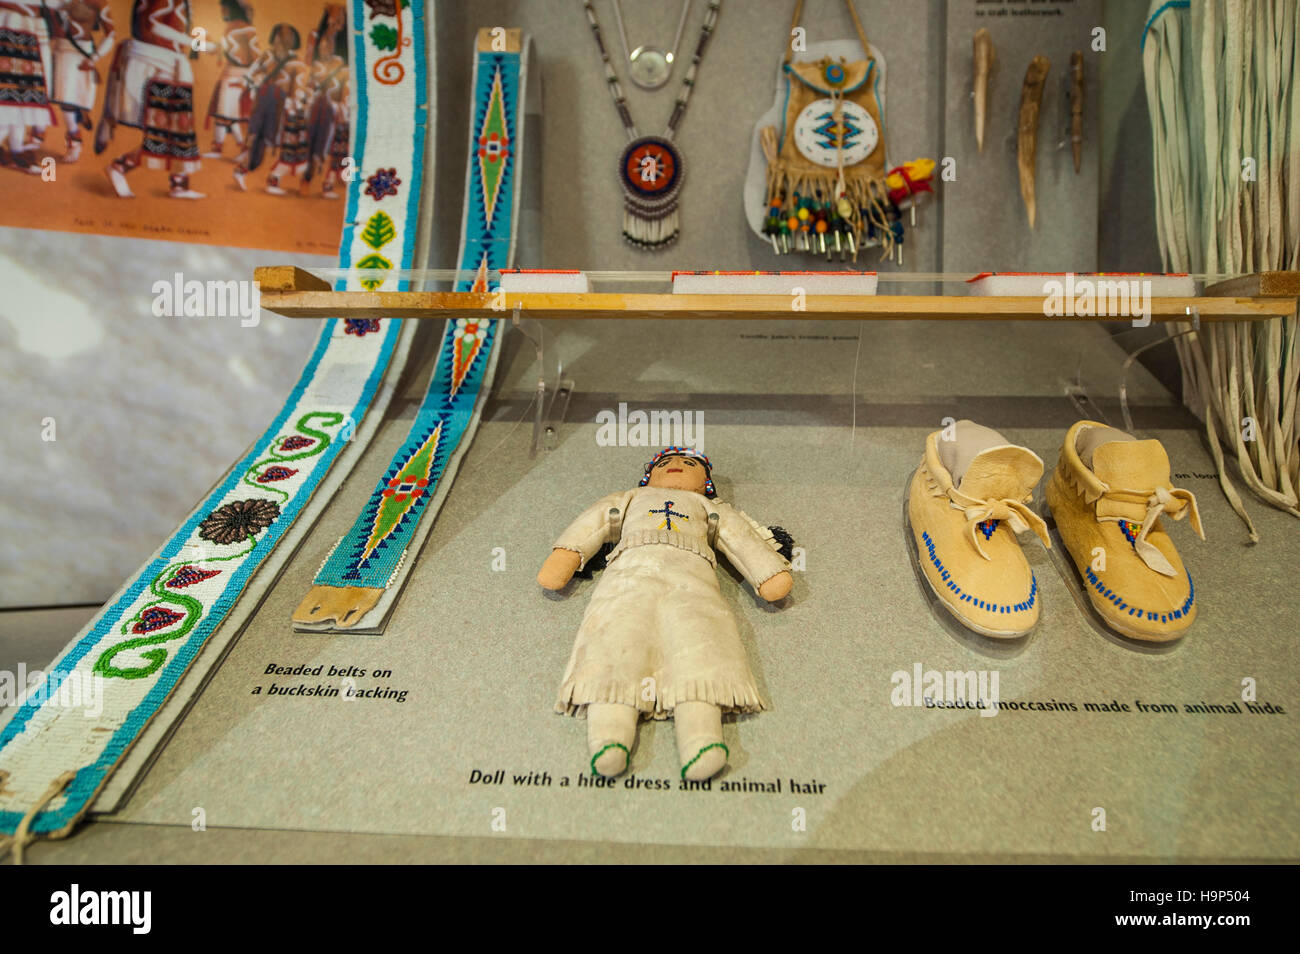 Doll, beadwork and Moccasins, Human History Museum, Zion National Park, Utah, USA. Stock Photo